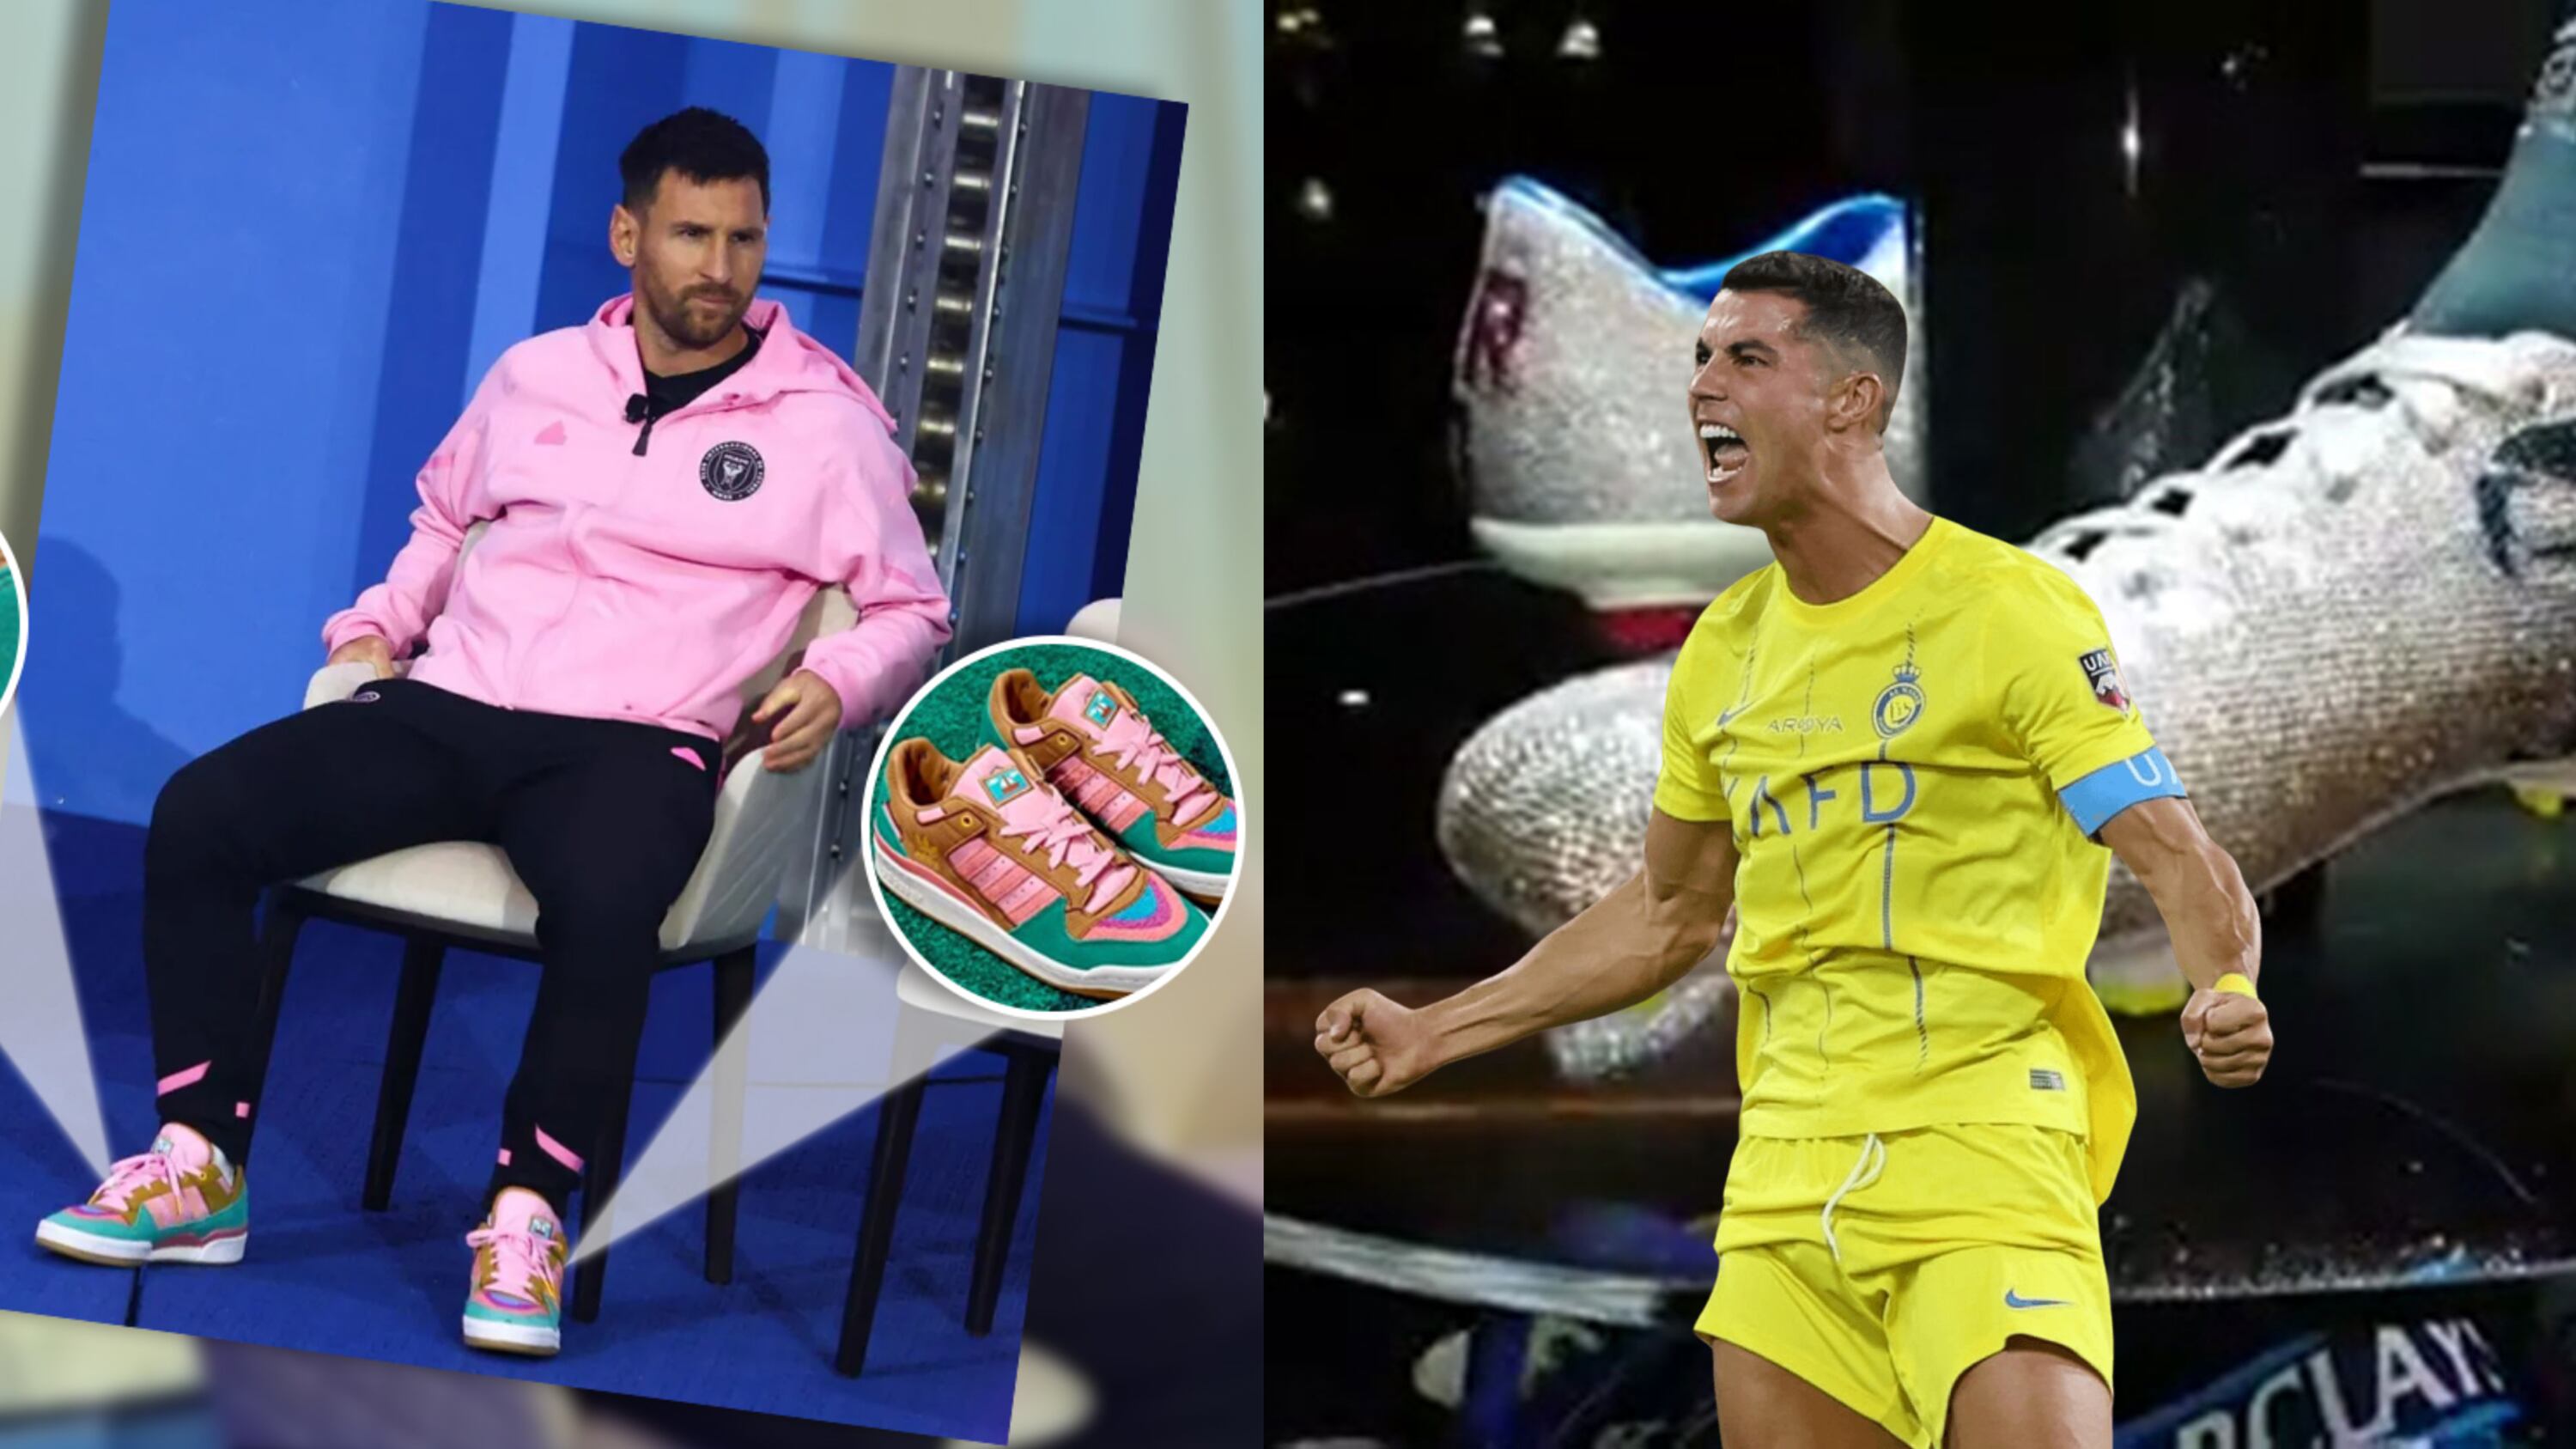 While Ronaldo wore shoes with diamonds, the price of Messi's new viral sneakers